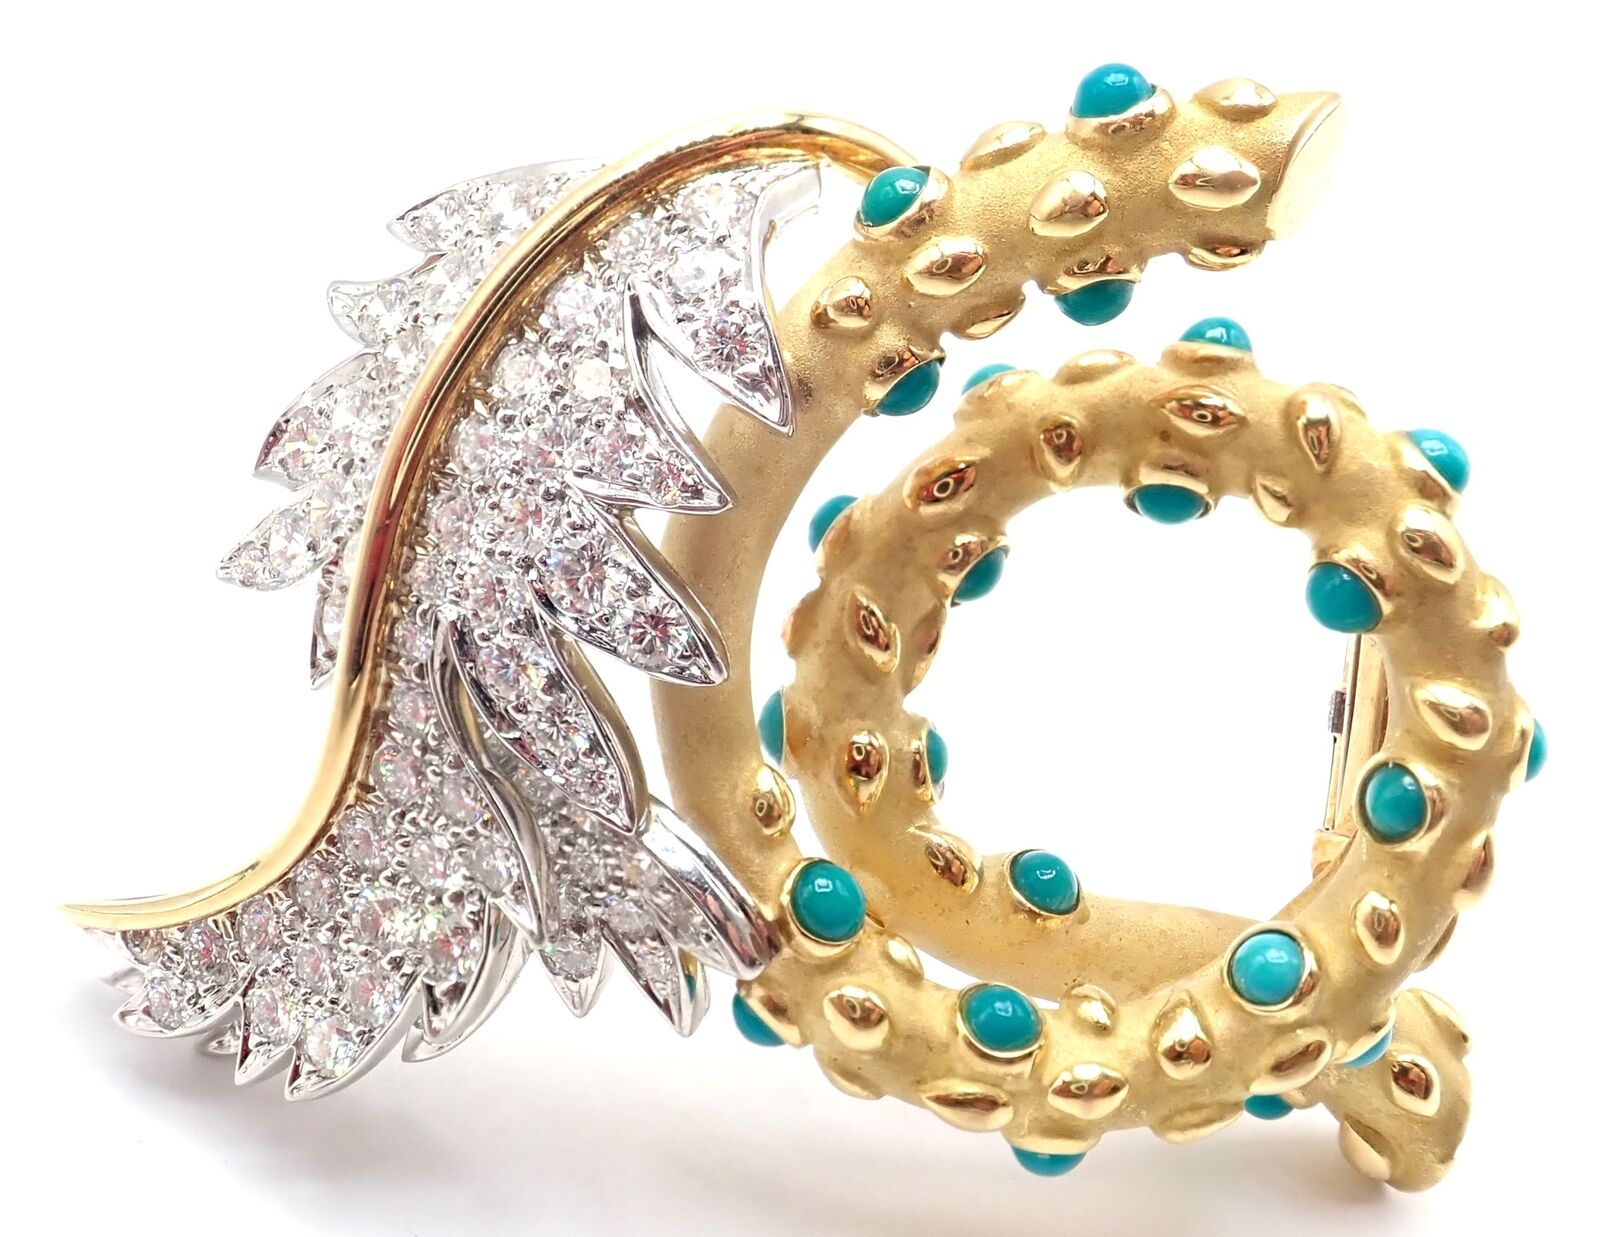 Tiffany & Co Schlumberger 18k Yellow Gold Platinum Diamond Turquoise Pin Brooch | Fortrove